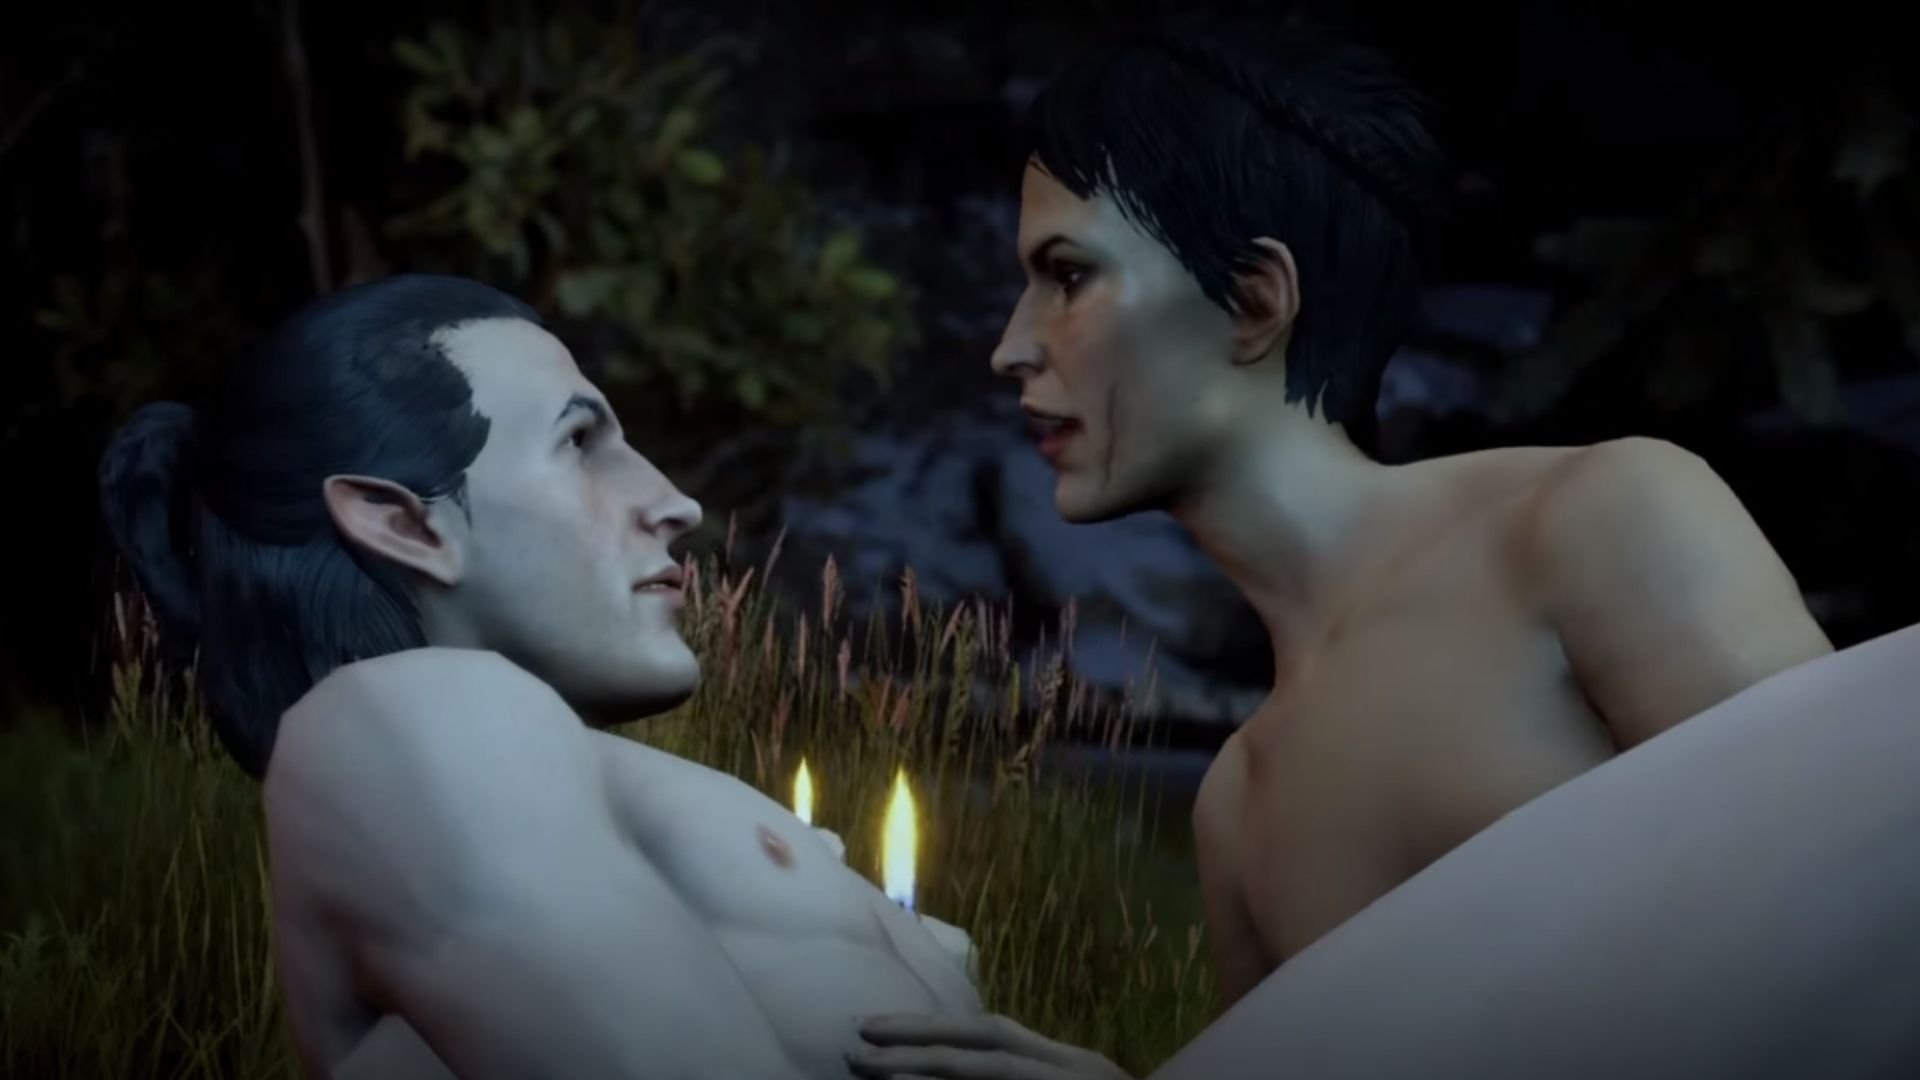 The romance scene between the Inquisitor and Cassandra